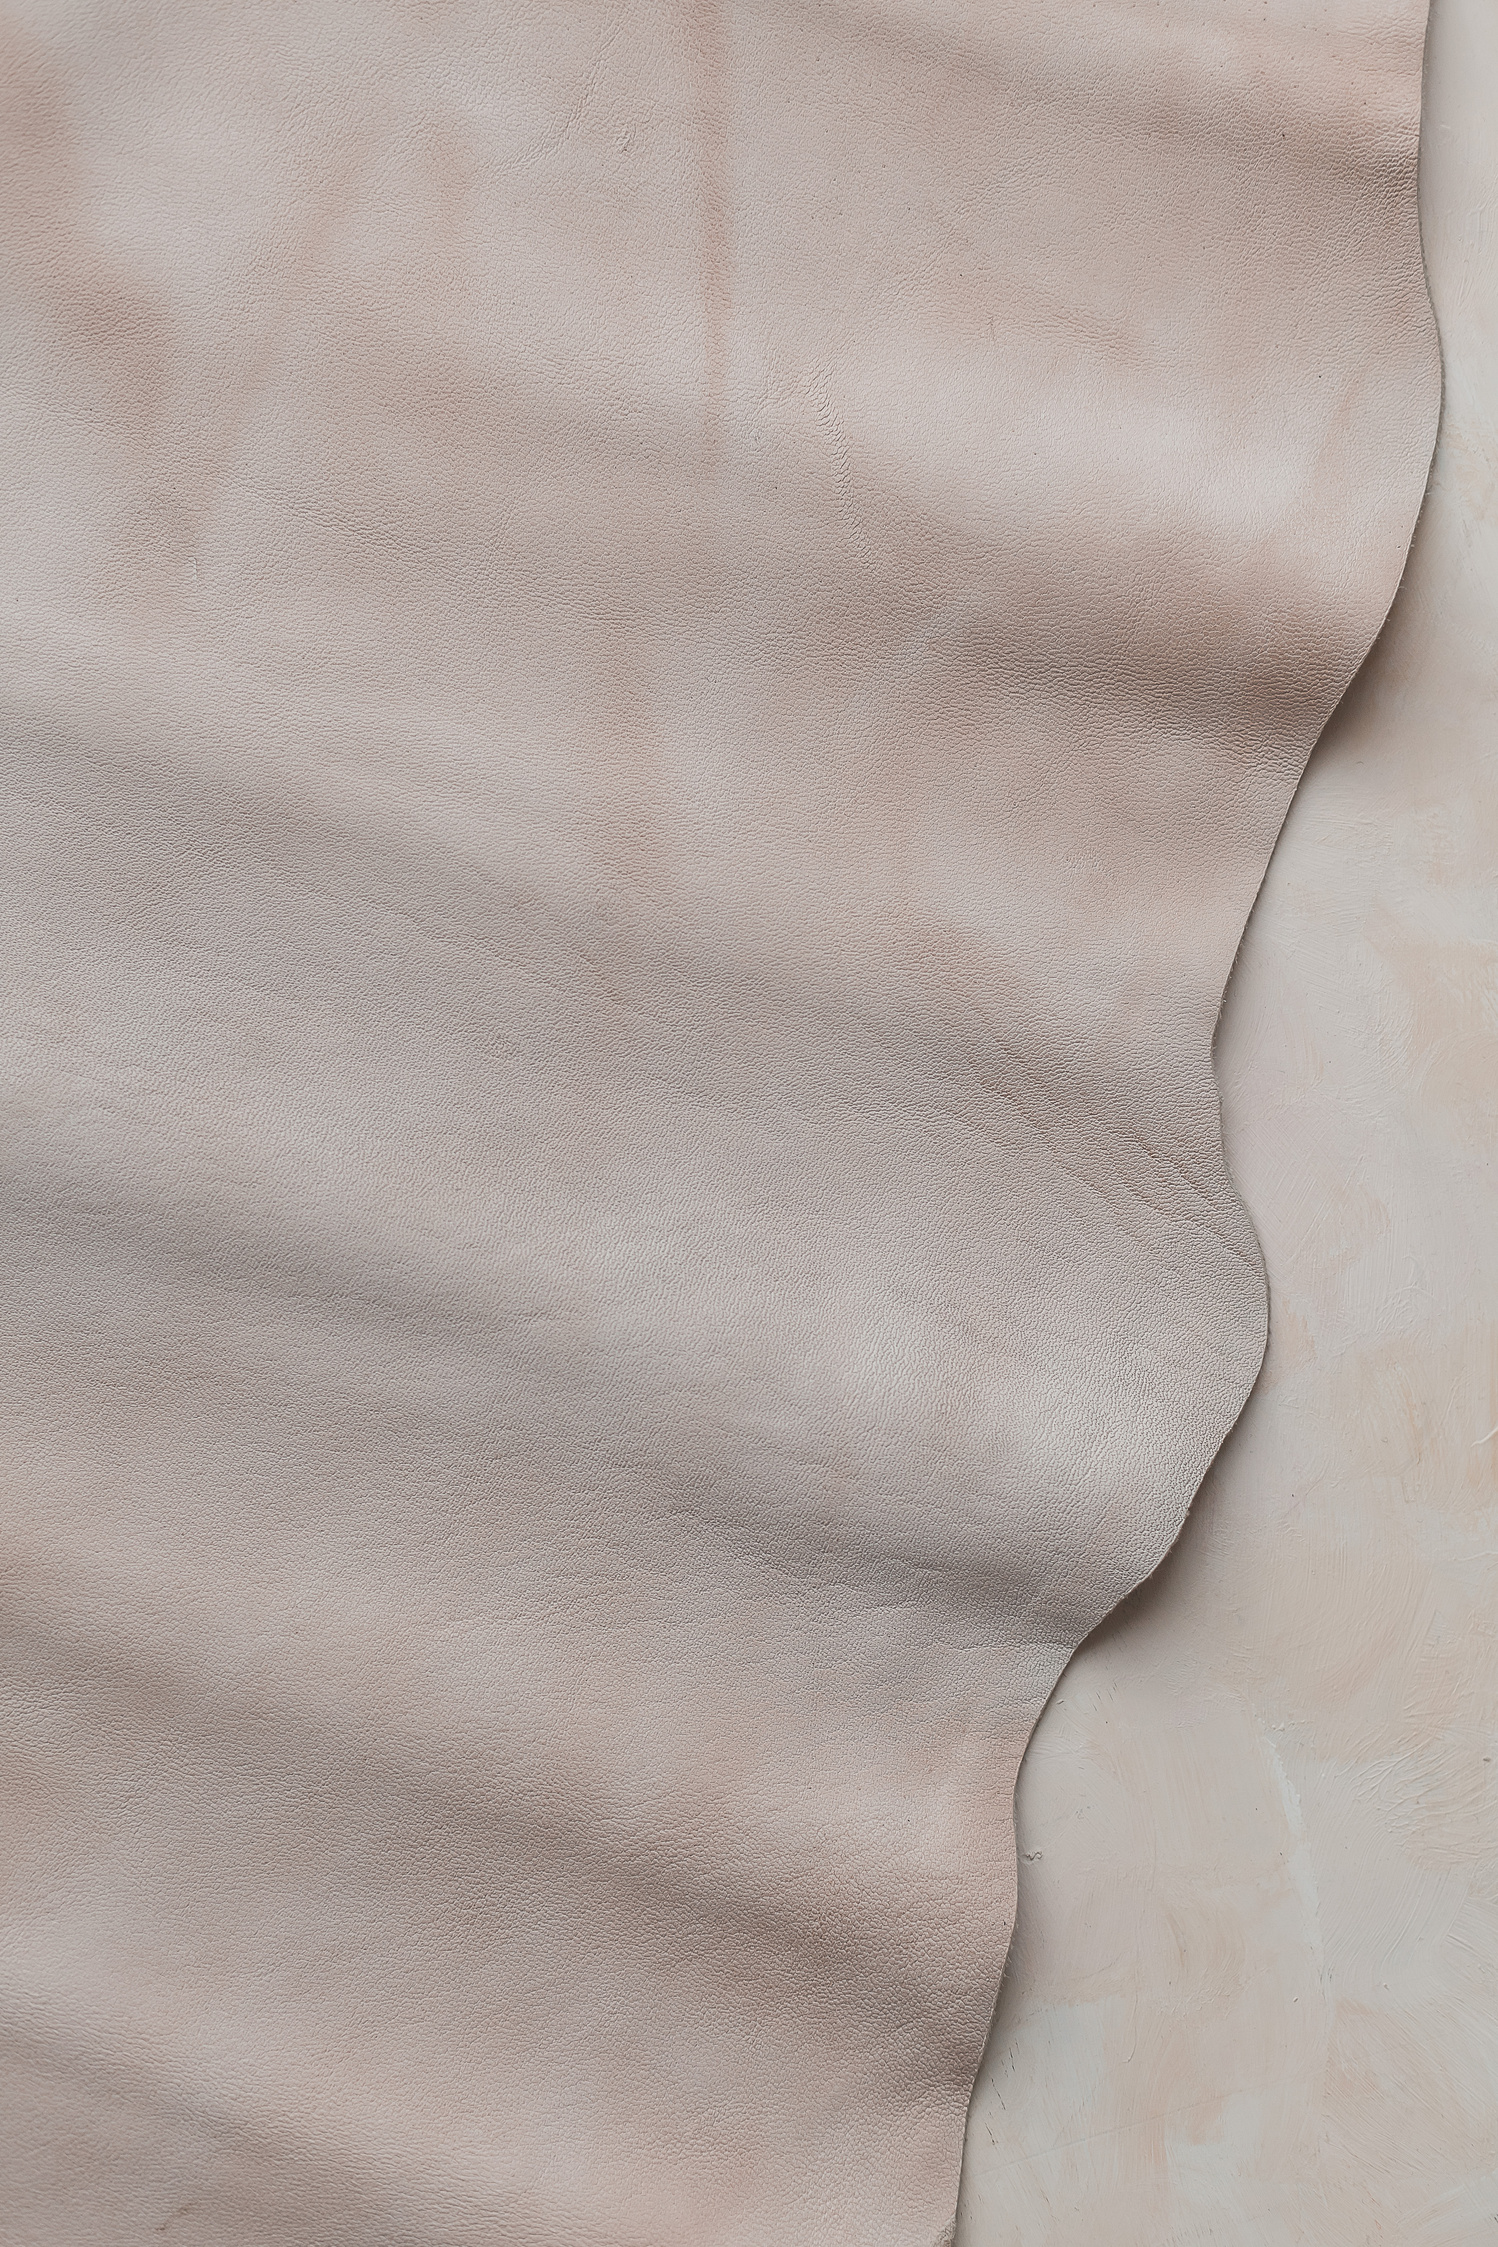 Beige Leather Fabric